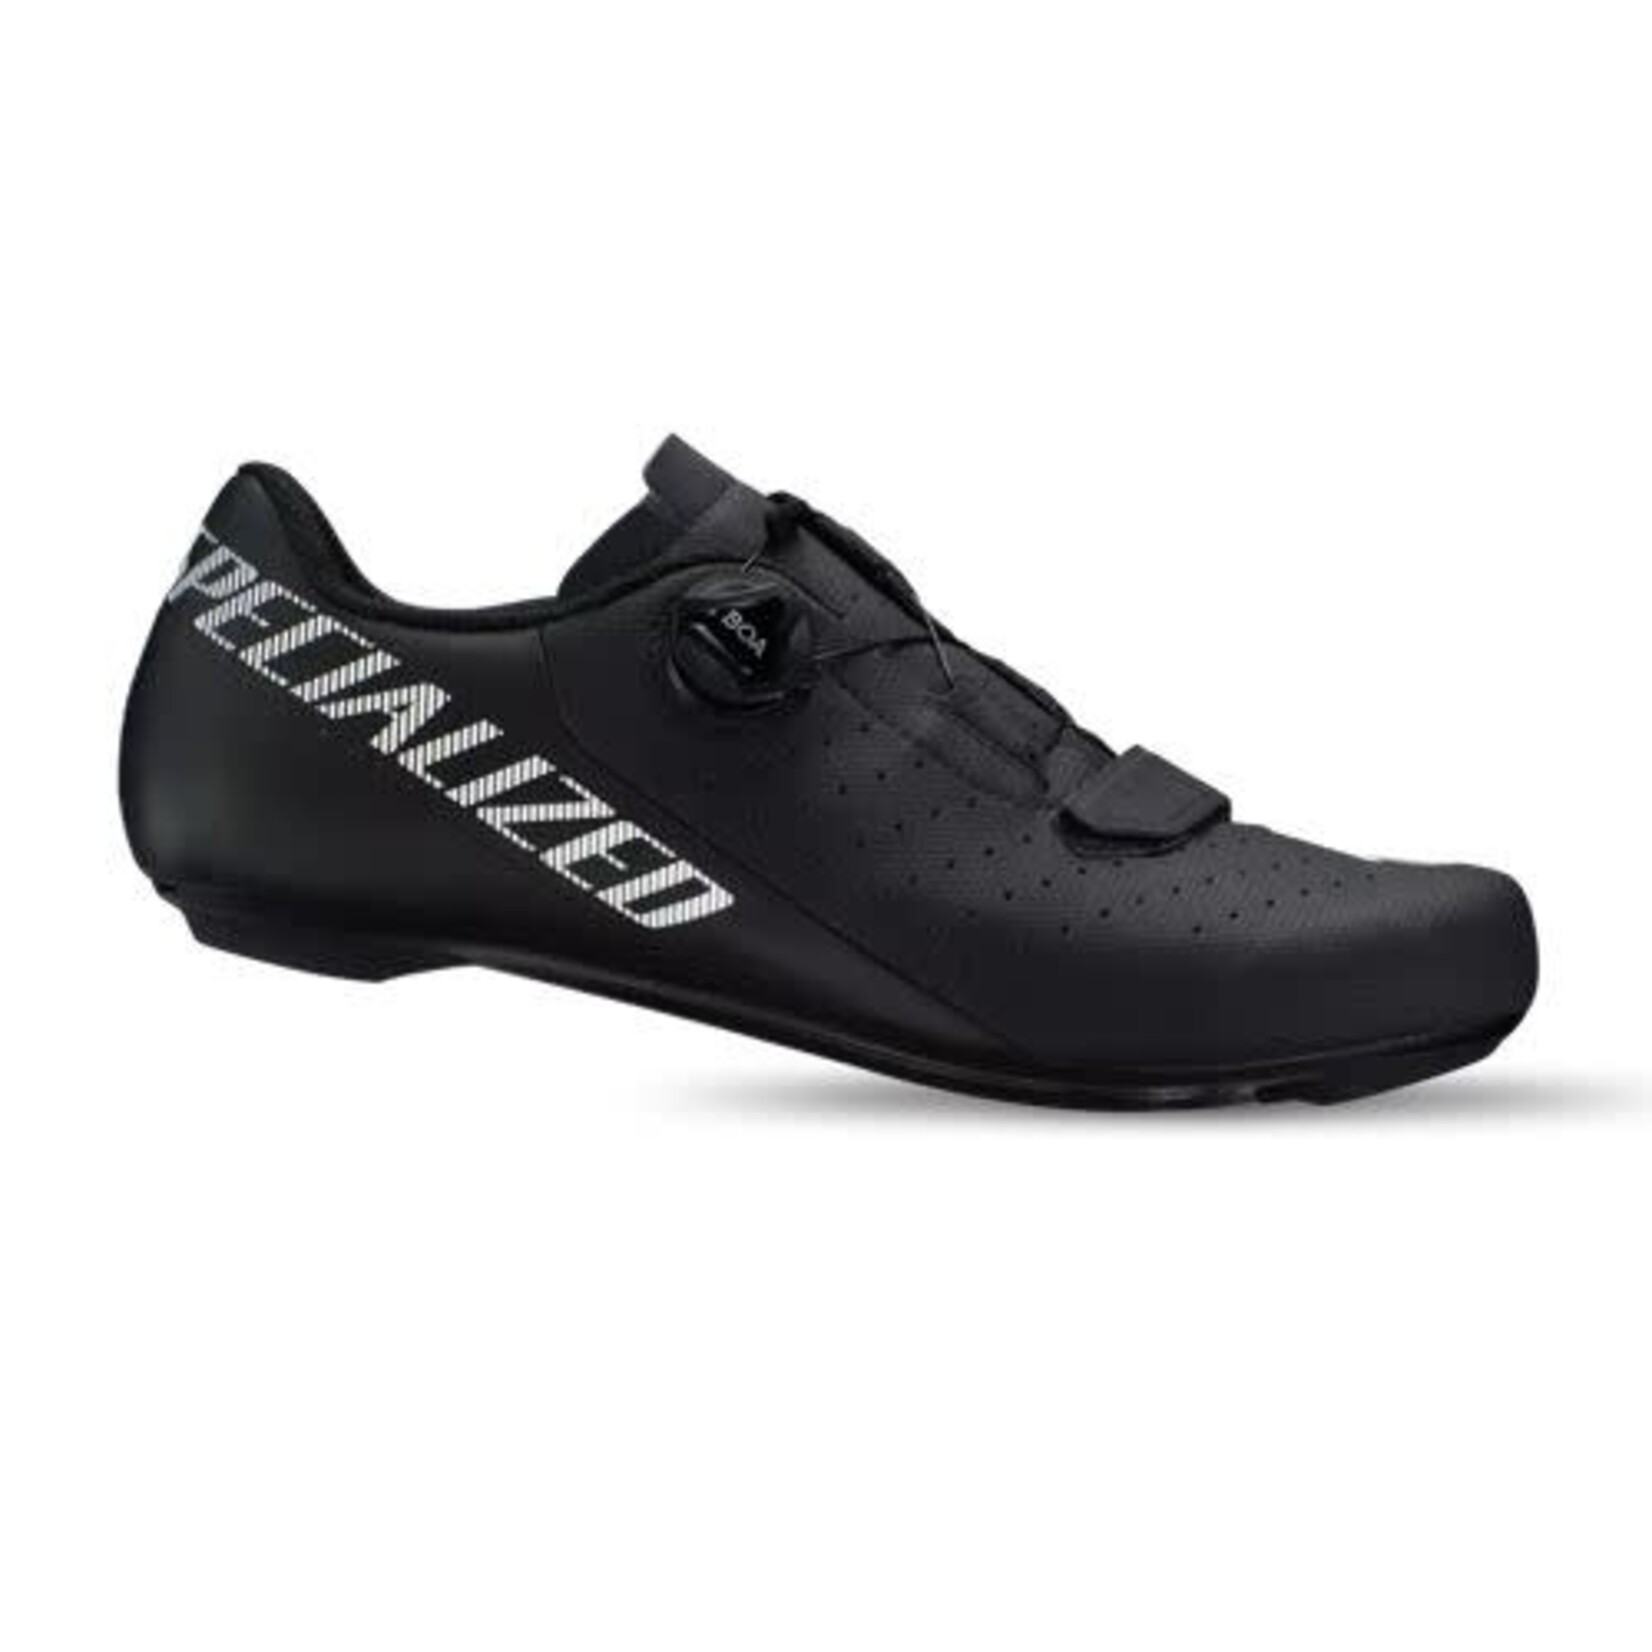 Specialized TORCH 1.0 RD SHOE BLACK 40